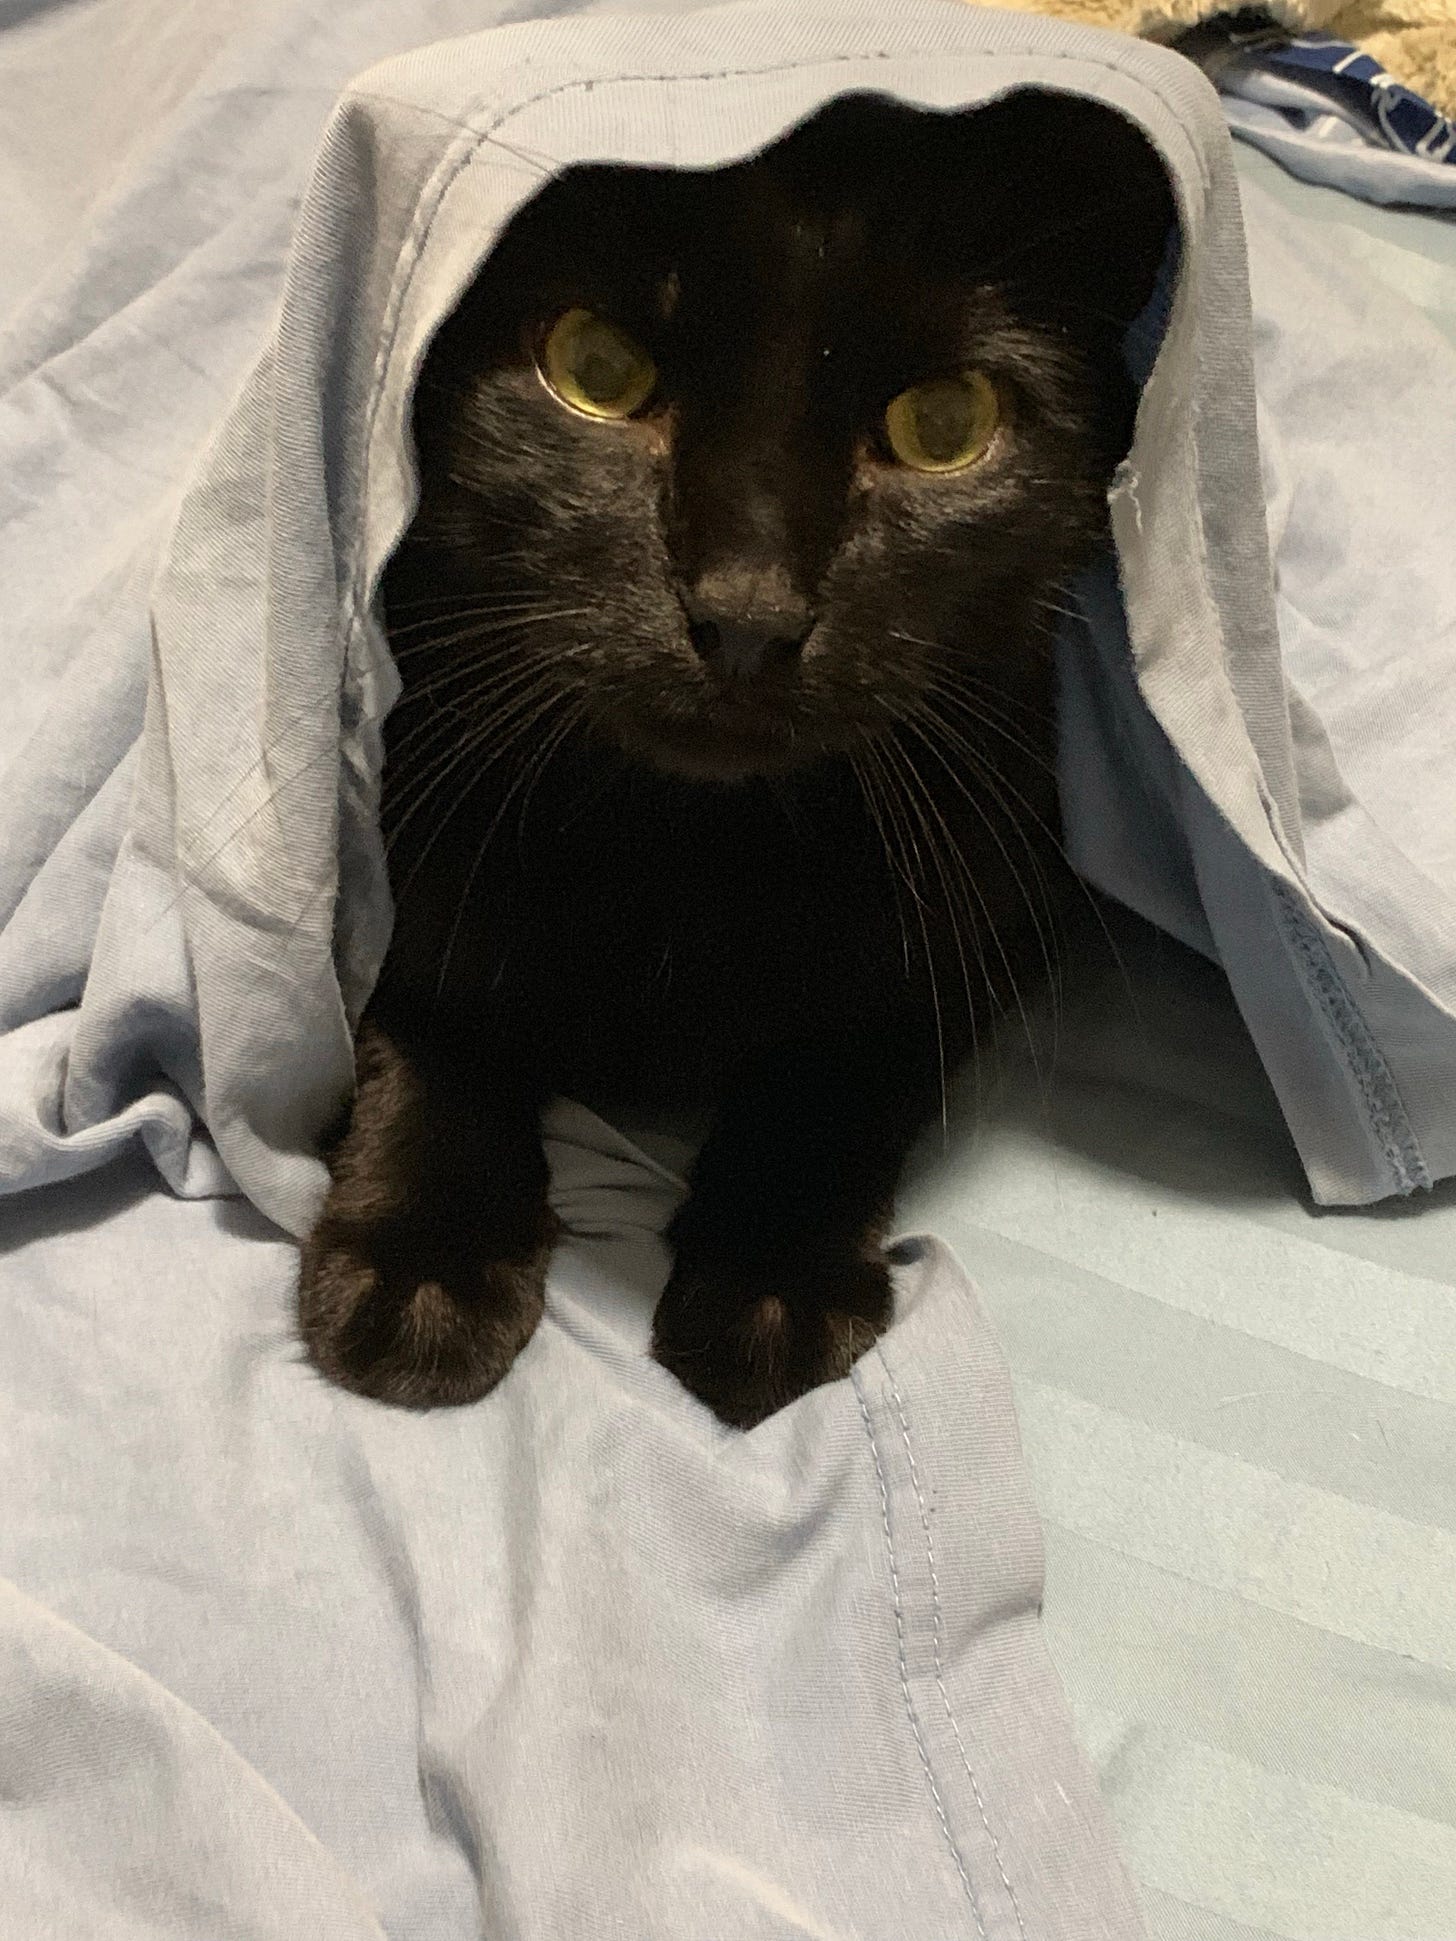 A black cat with green eyes under the sheets.